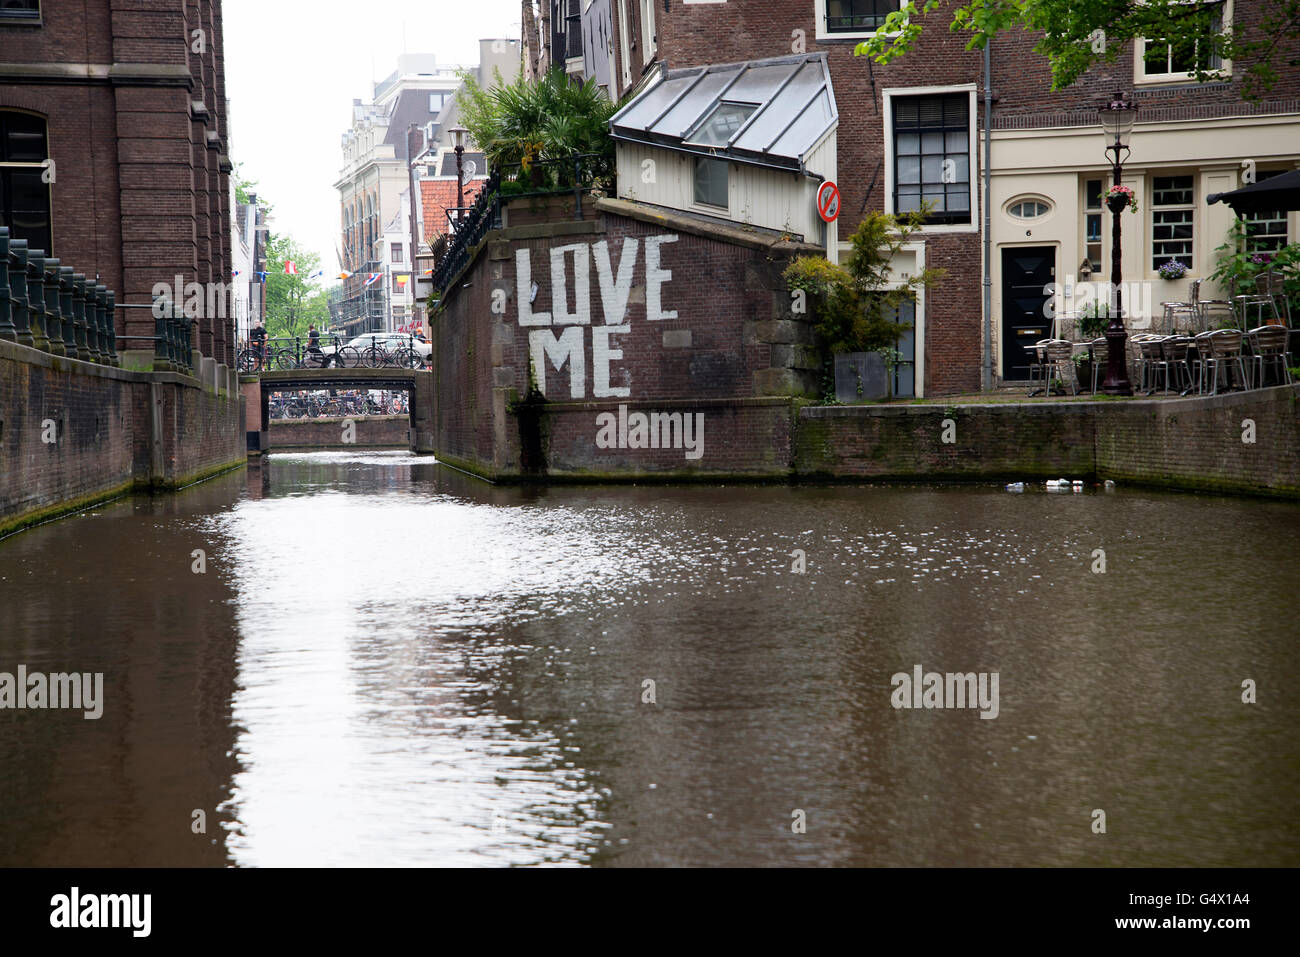 'LOVE ME' graffiti on the wall of a waterway canal in Amsterdam. Stock Photo